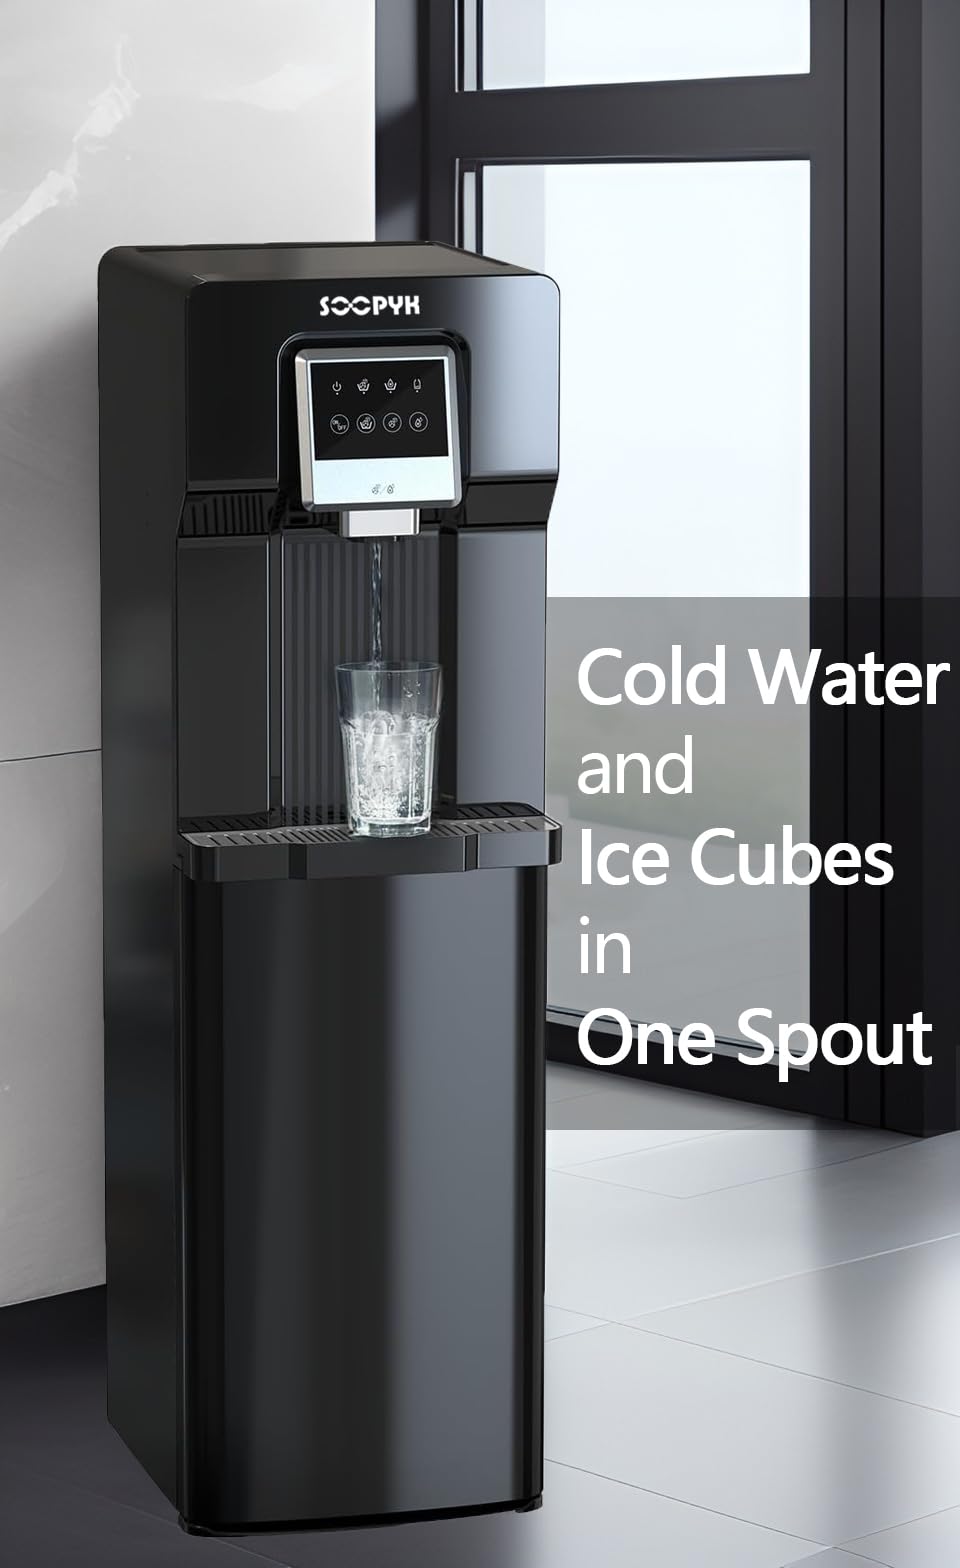 SOOPYK 2 in 1 Bottom Load Water Cooler Dispenser with Ice Maker for 5 Gallon Bottle 27 lbs in 24 hrs for Home Office (Without Hot Water)